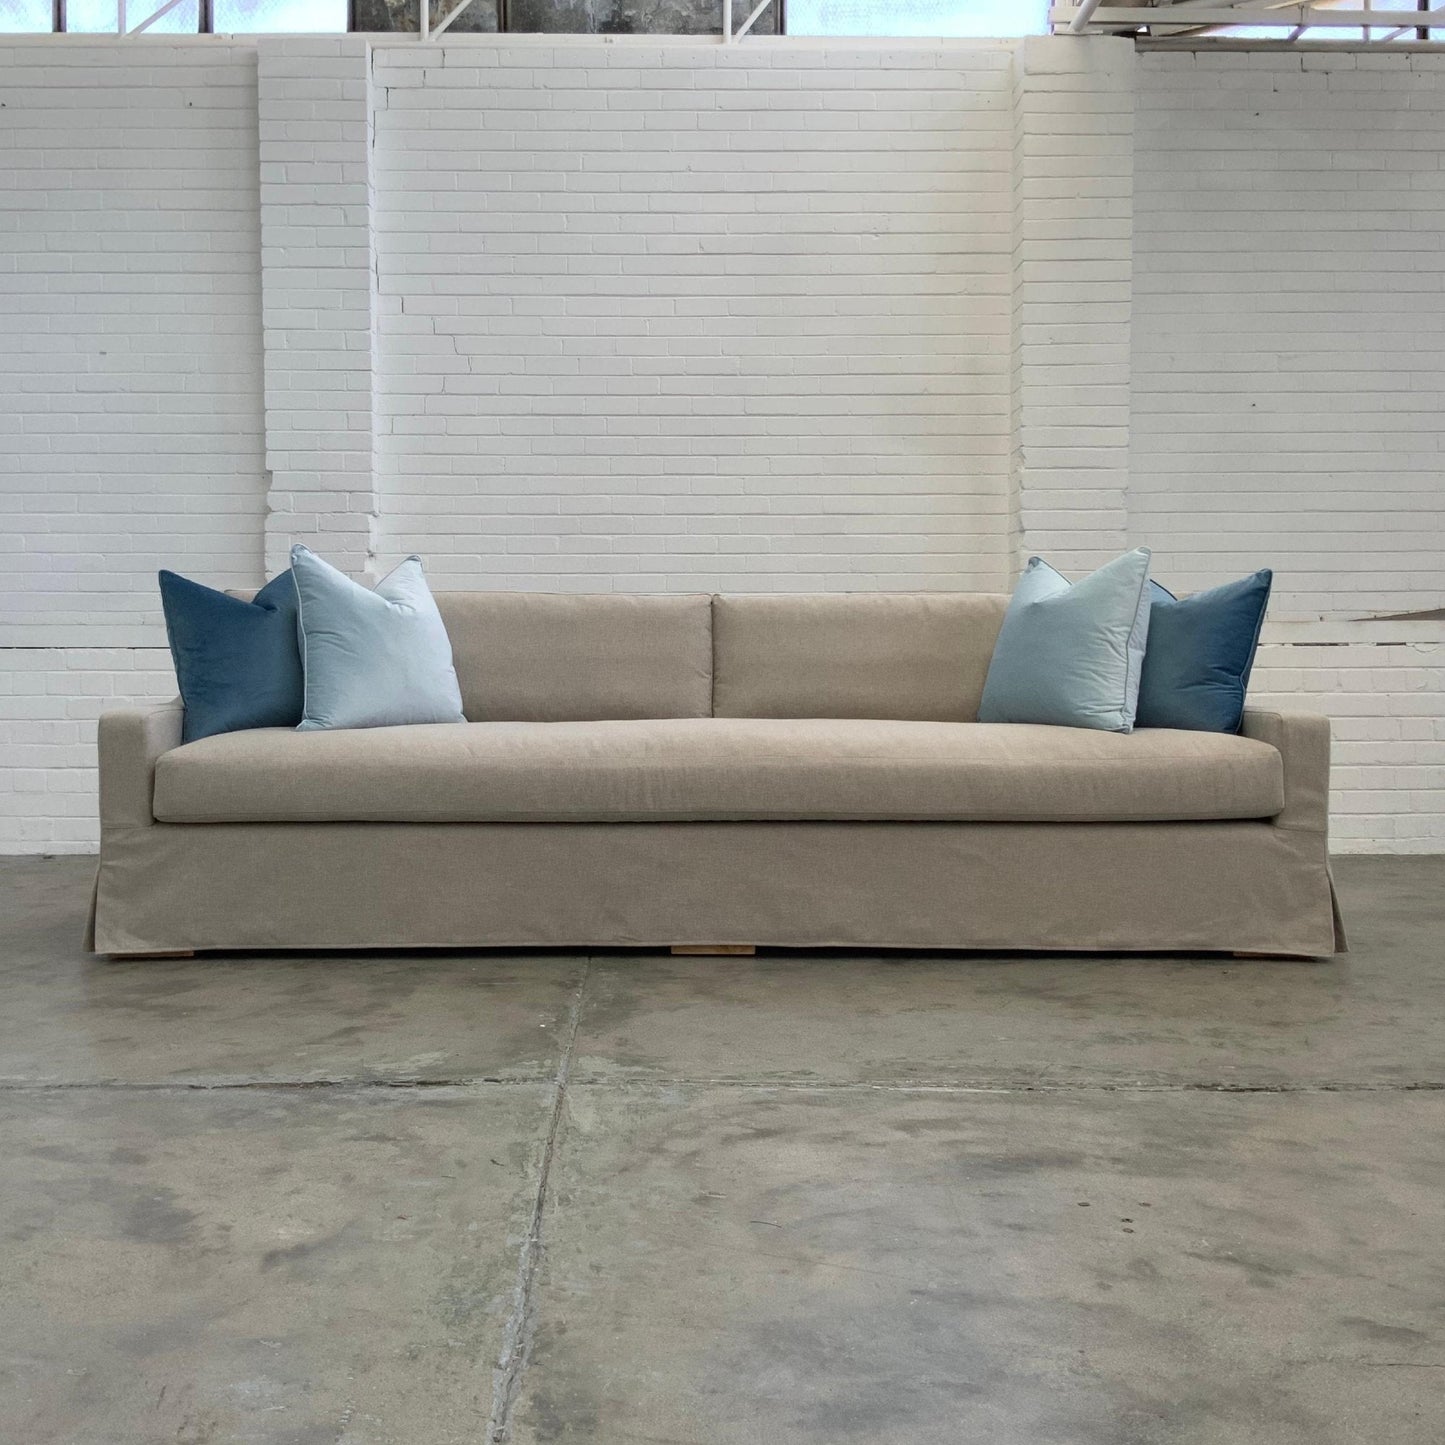 Hillhouse Slip-Cover Sofa | Value Fabrics Range Multiple Sizes And Options Available Made To Order